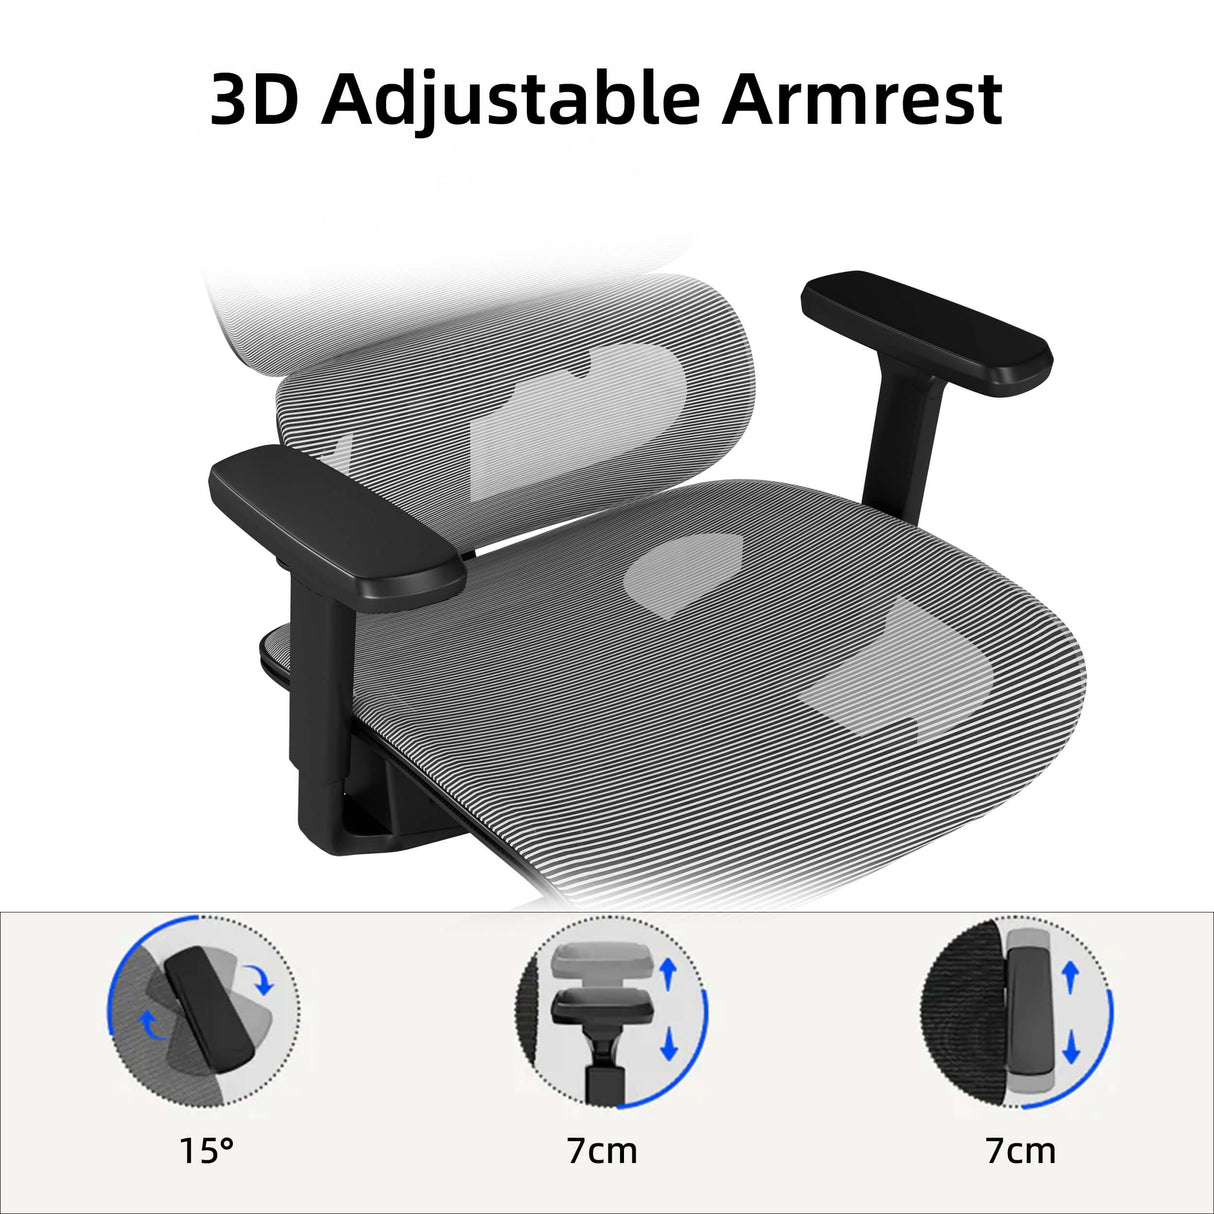 Maidesite black mesh office chair with 3D adjustable armrest